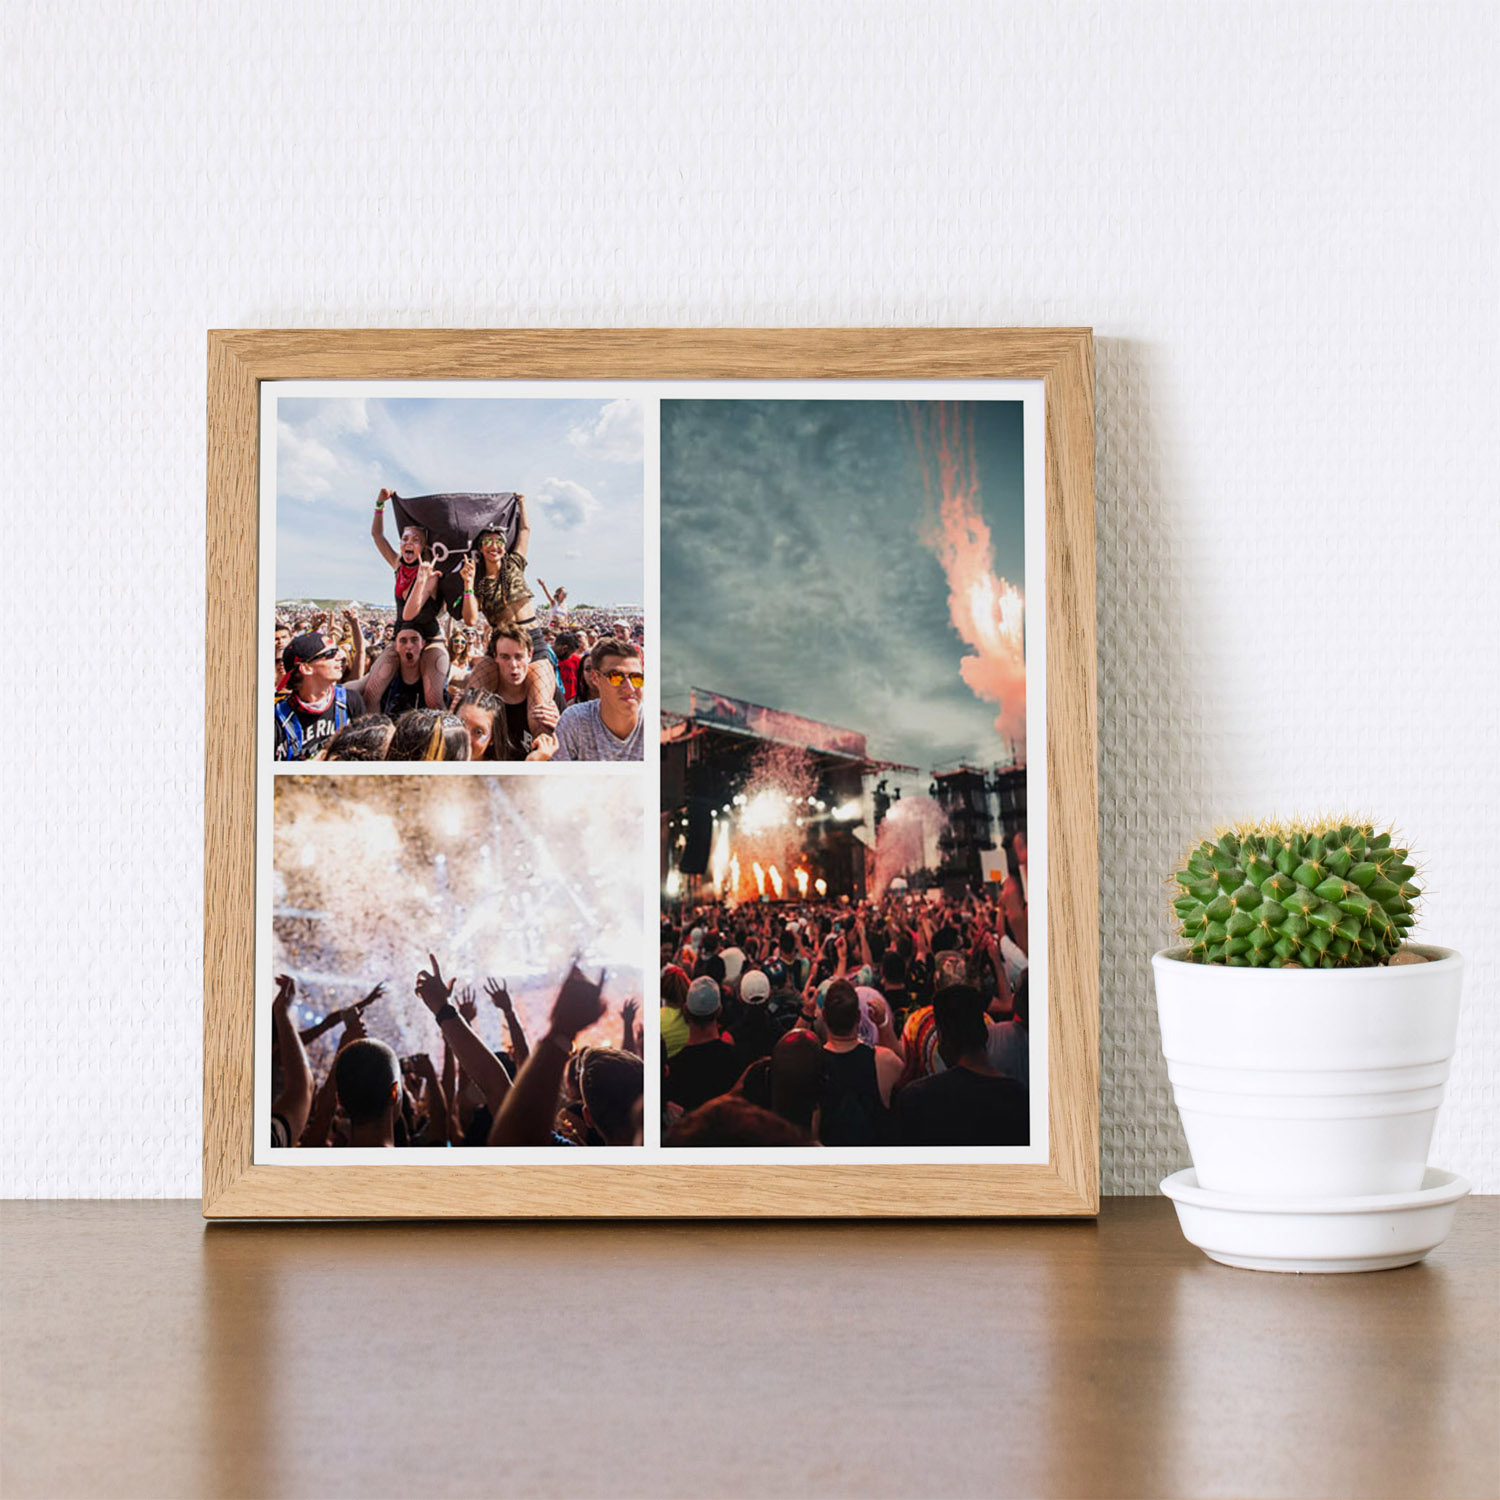 Unique three photo collage print of music festival photos displayed in a quality custom light wood picture frame finished with acrylic glass